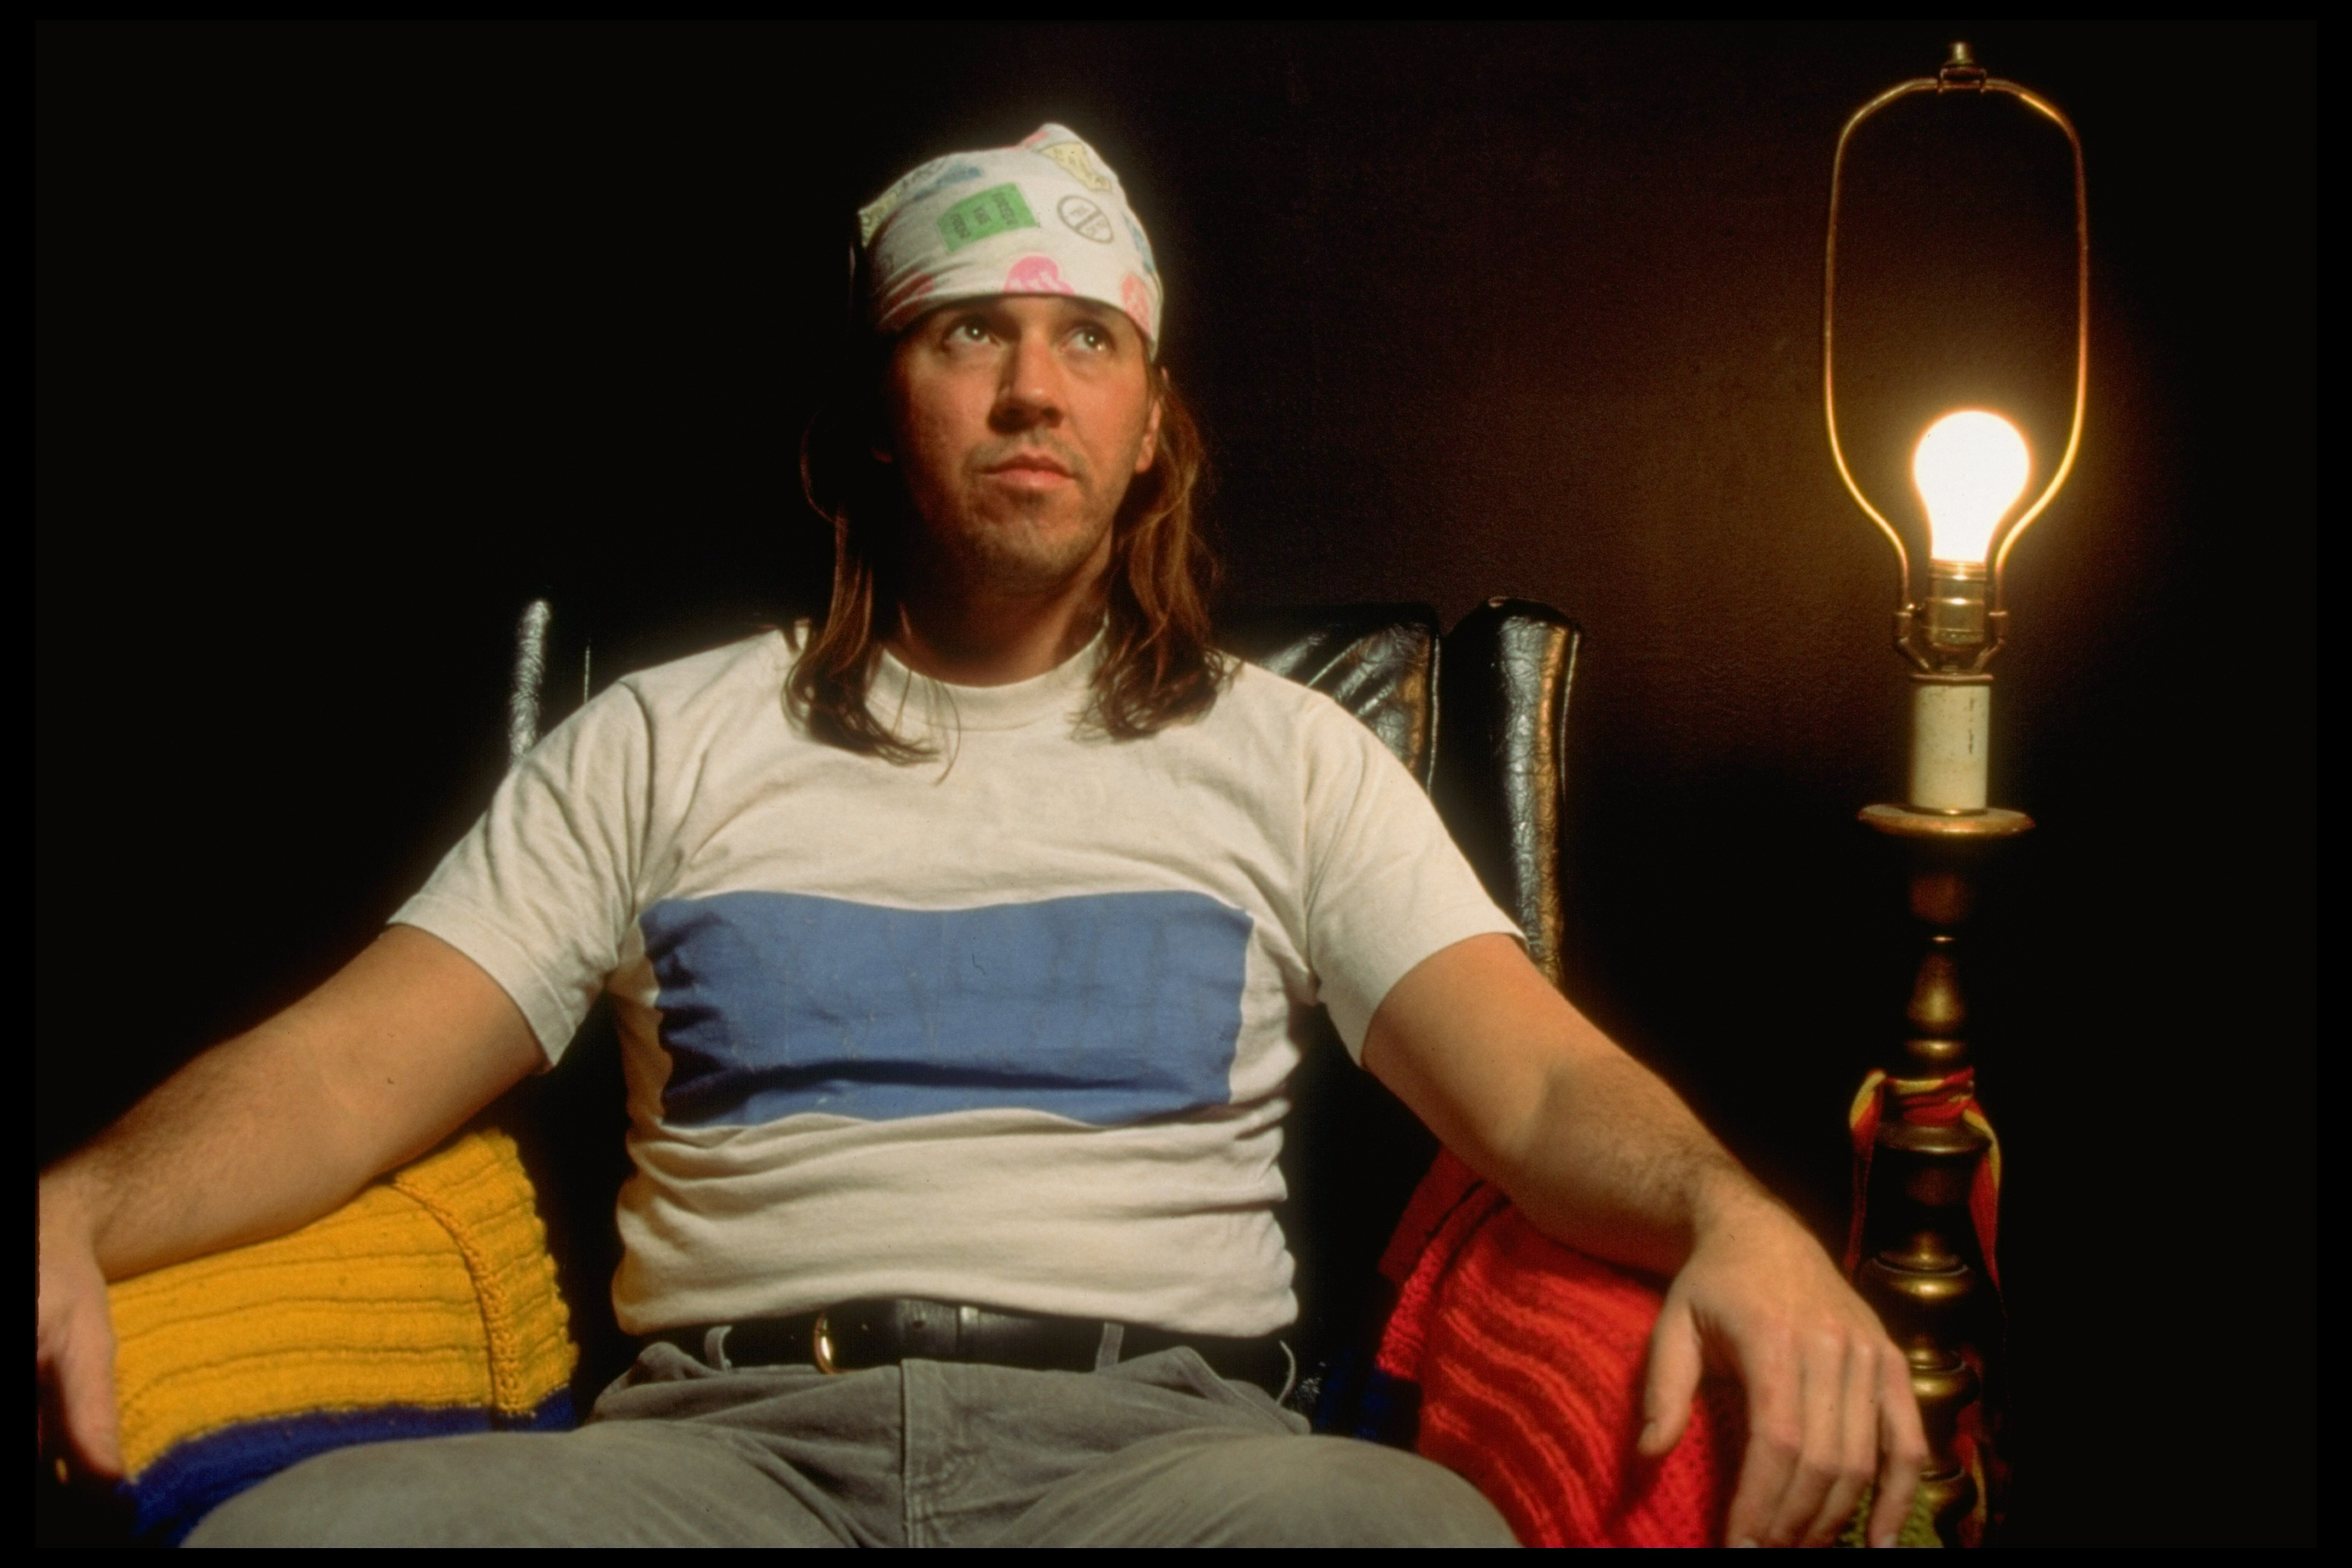 Author David Foster Wallace. (Steve Liss&mdash;The LIFE Images Collection/Getty)